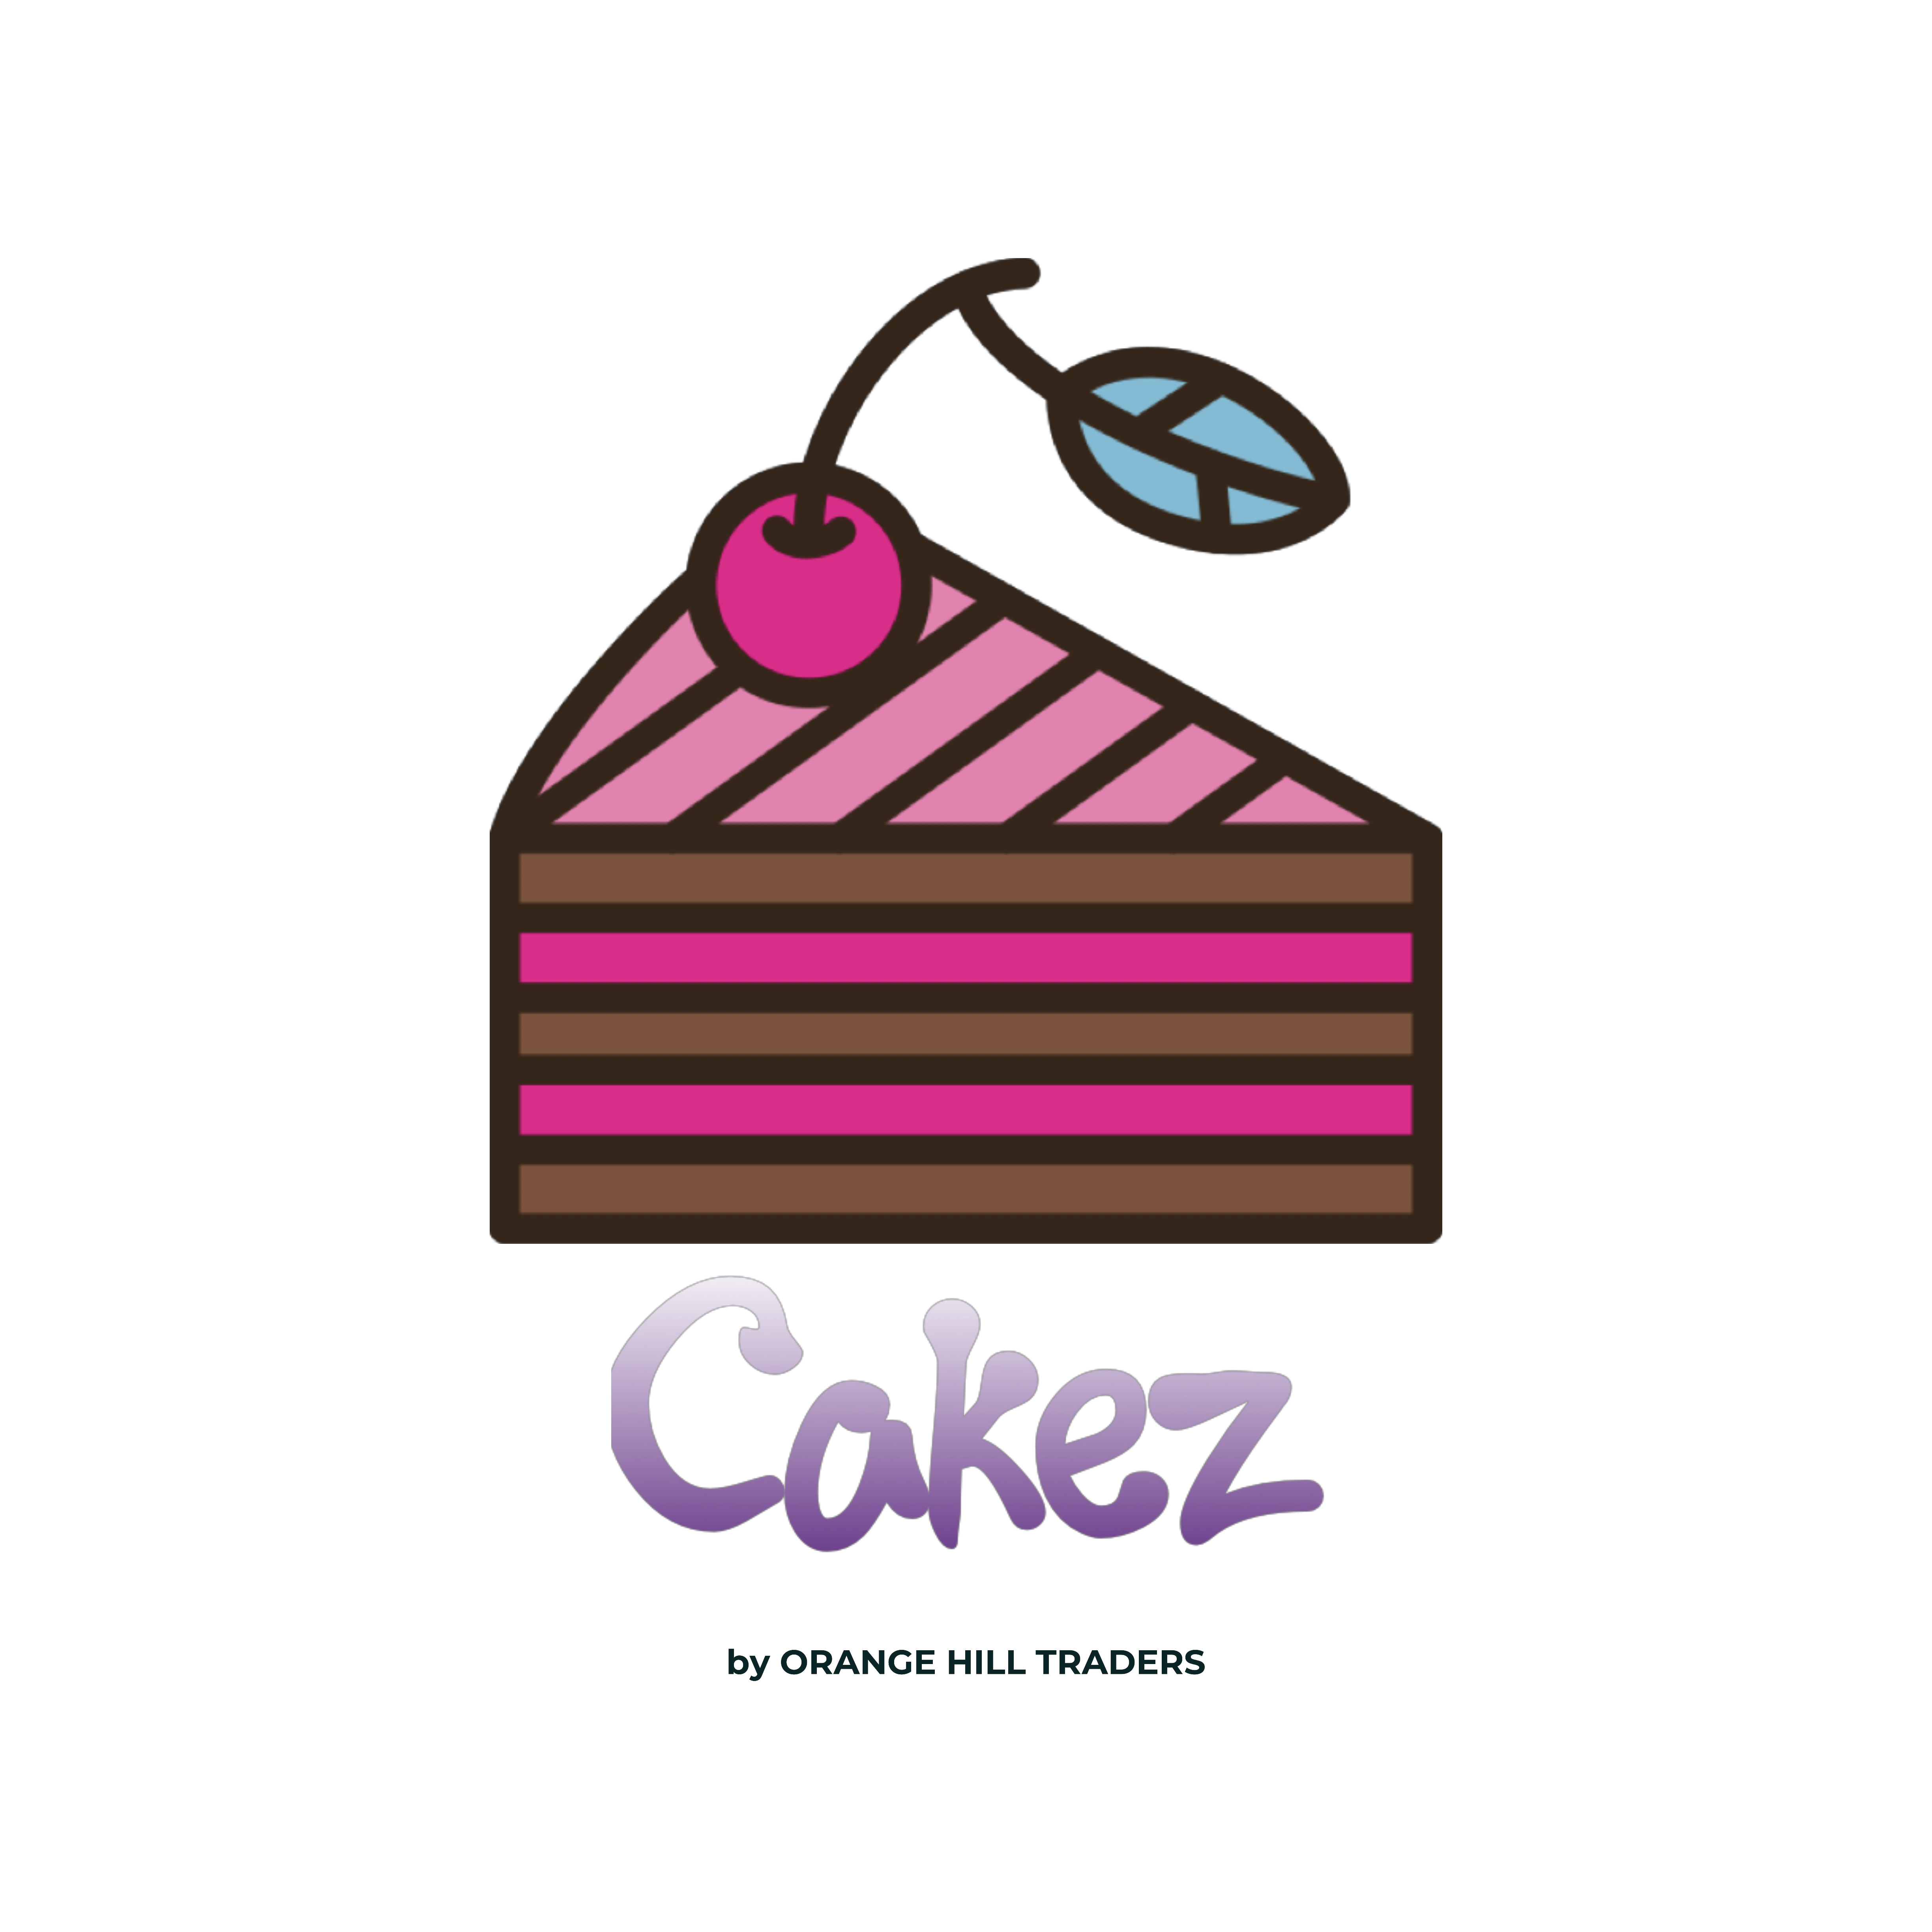 ORDER THE REAL GAS CAKEZ ©